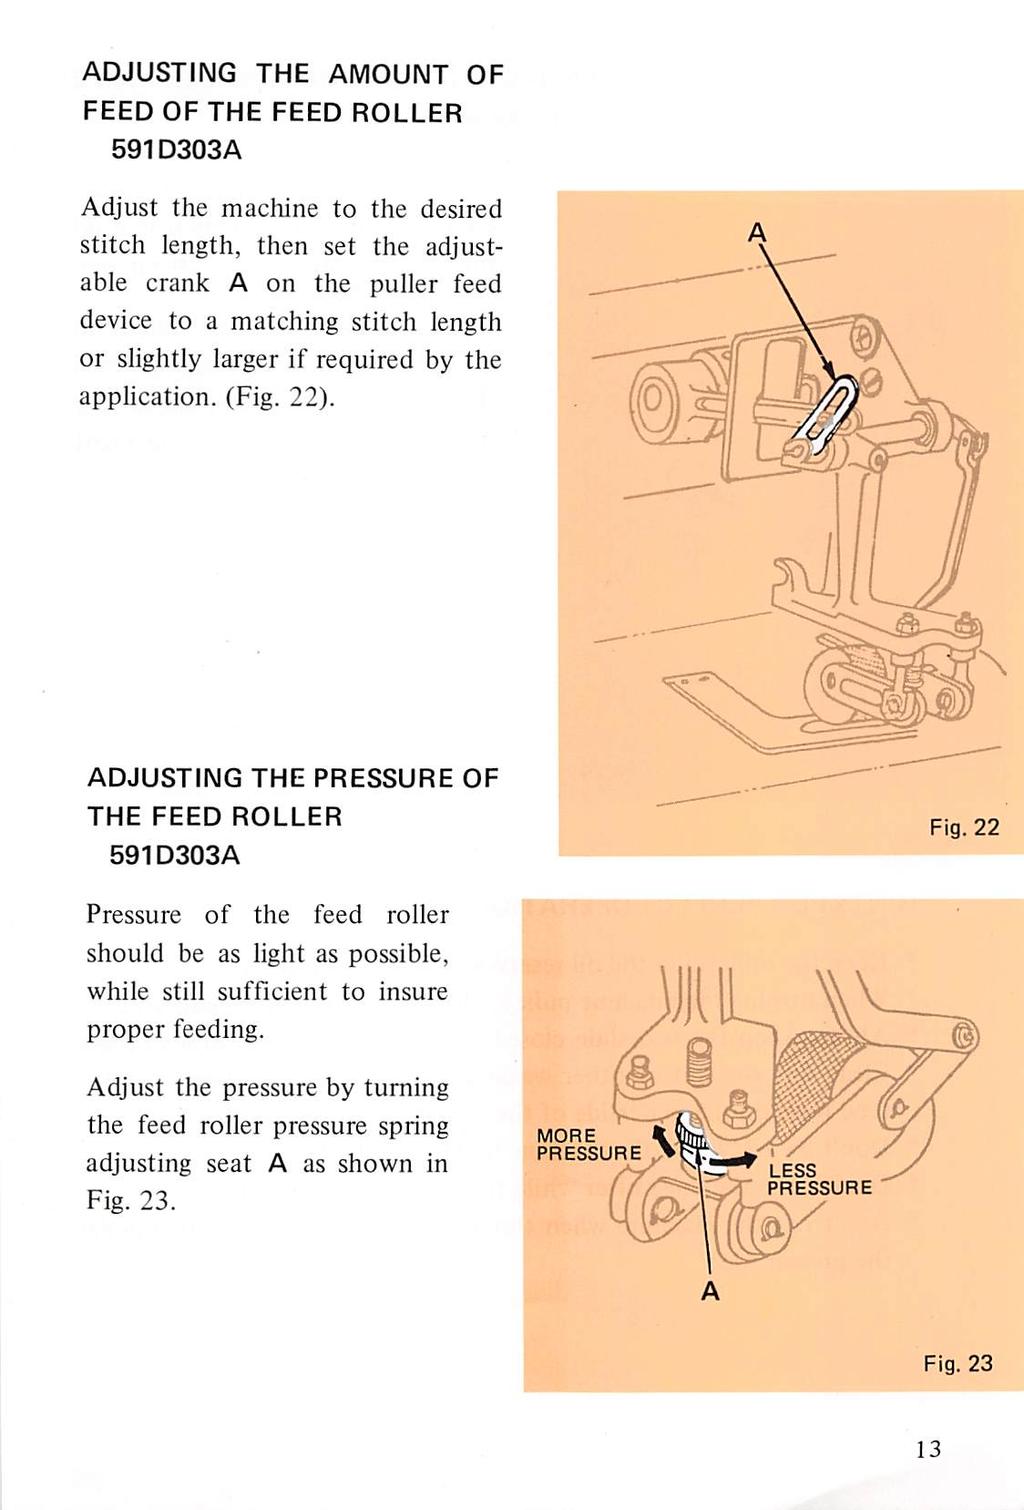 ADJUSTING THE AMOUNT OF FEED OF THE FEED ROLLER 591D303A Adjust the machine to the desired stitch length, then set the adjust able crank A on the puller feed device to a matching stitch length or